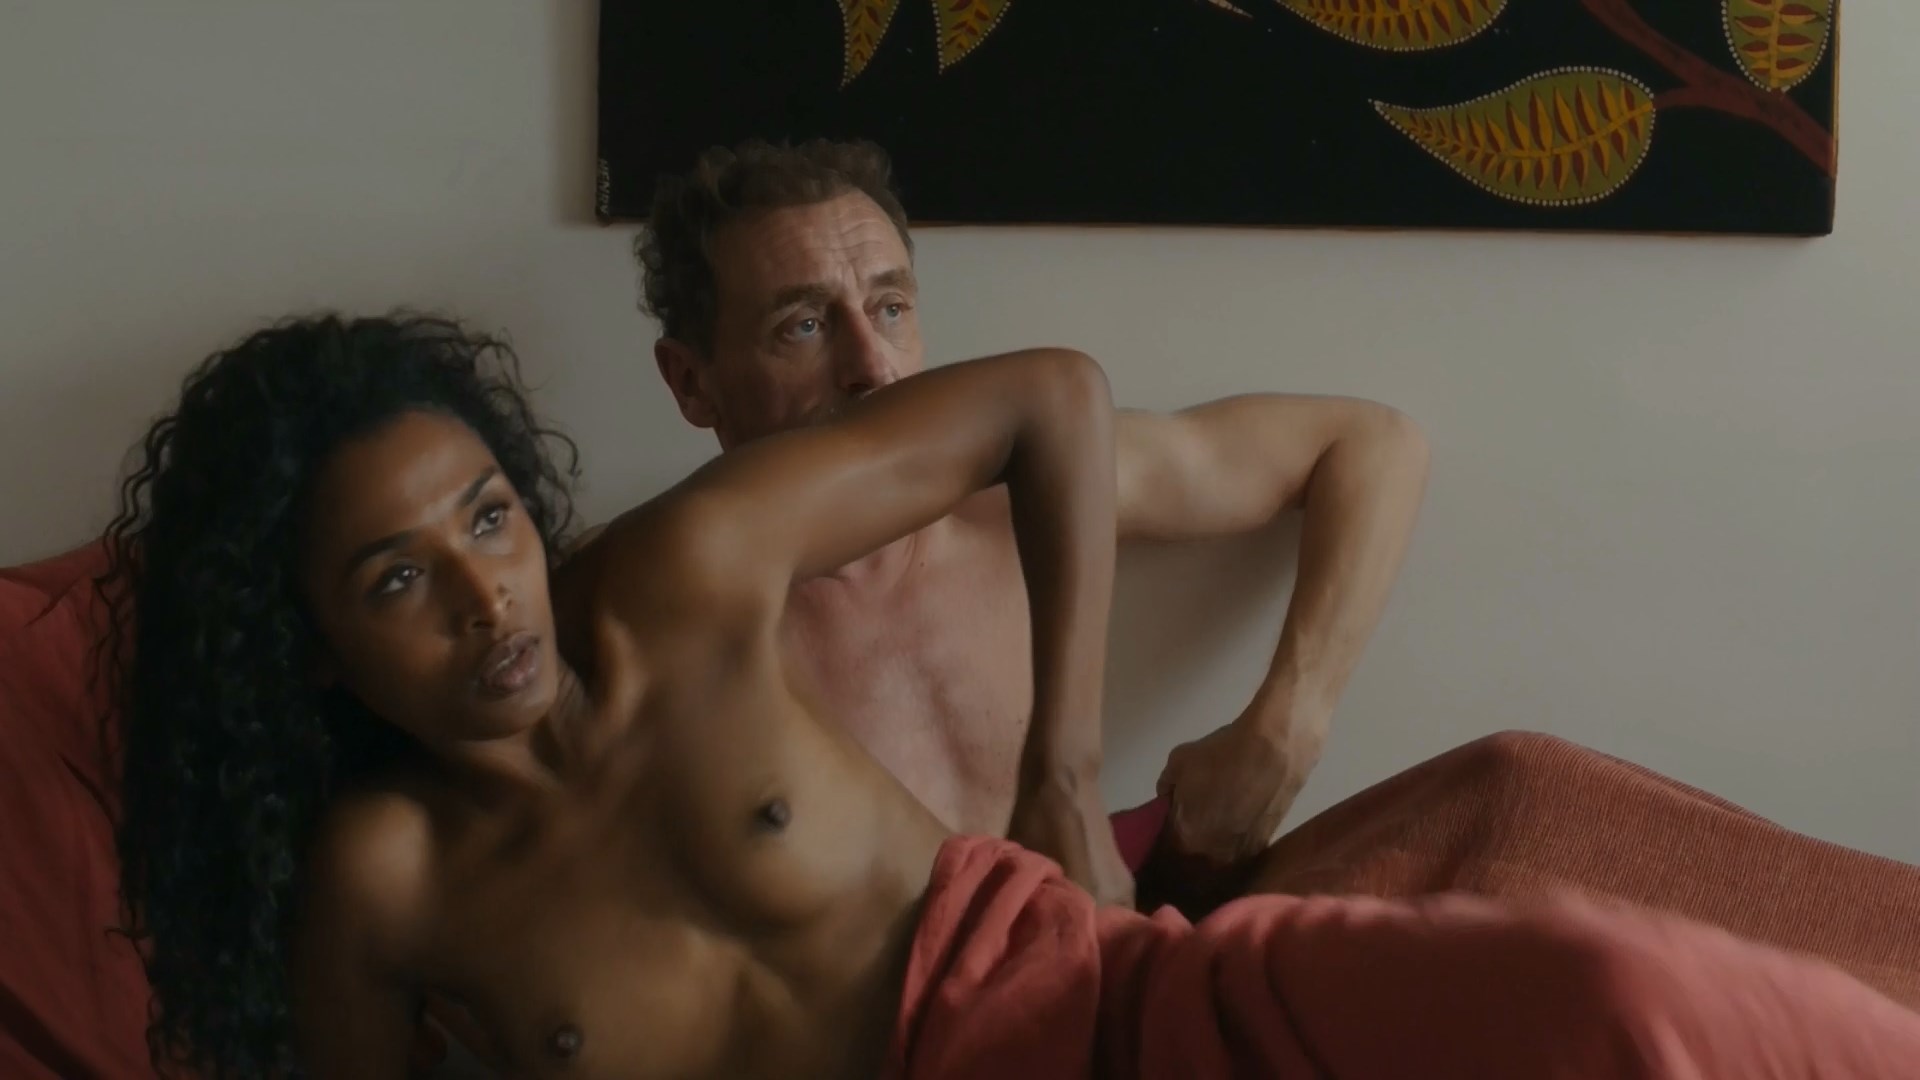 Sara Martins has a nude moment in the movie “Voyez comme on danse” which wa...